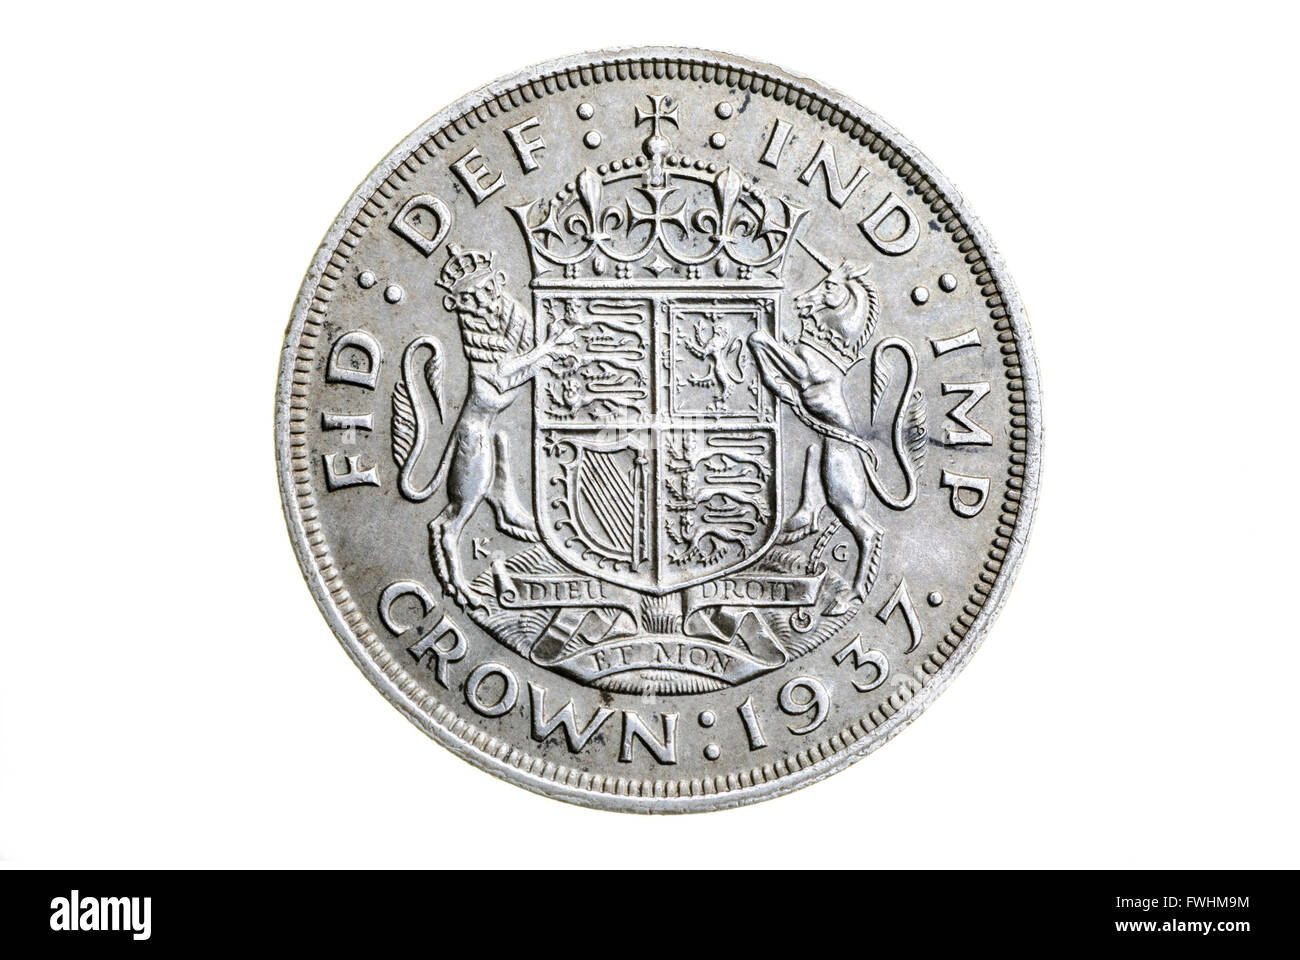 Old crown, pre decimal UK coinage. Stock Photo